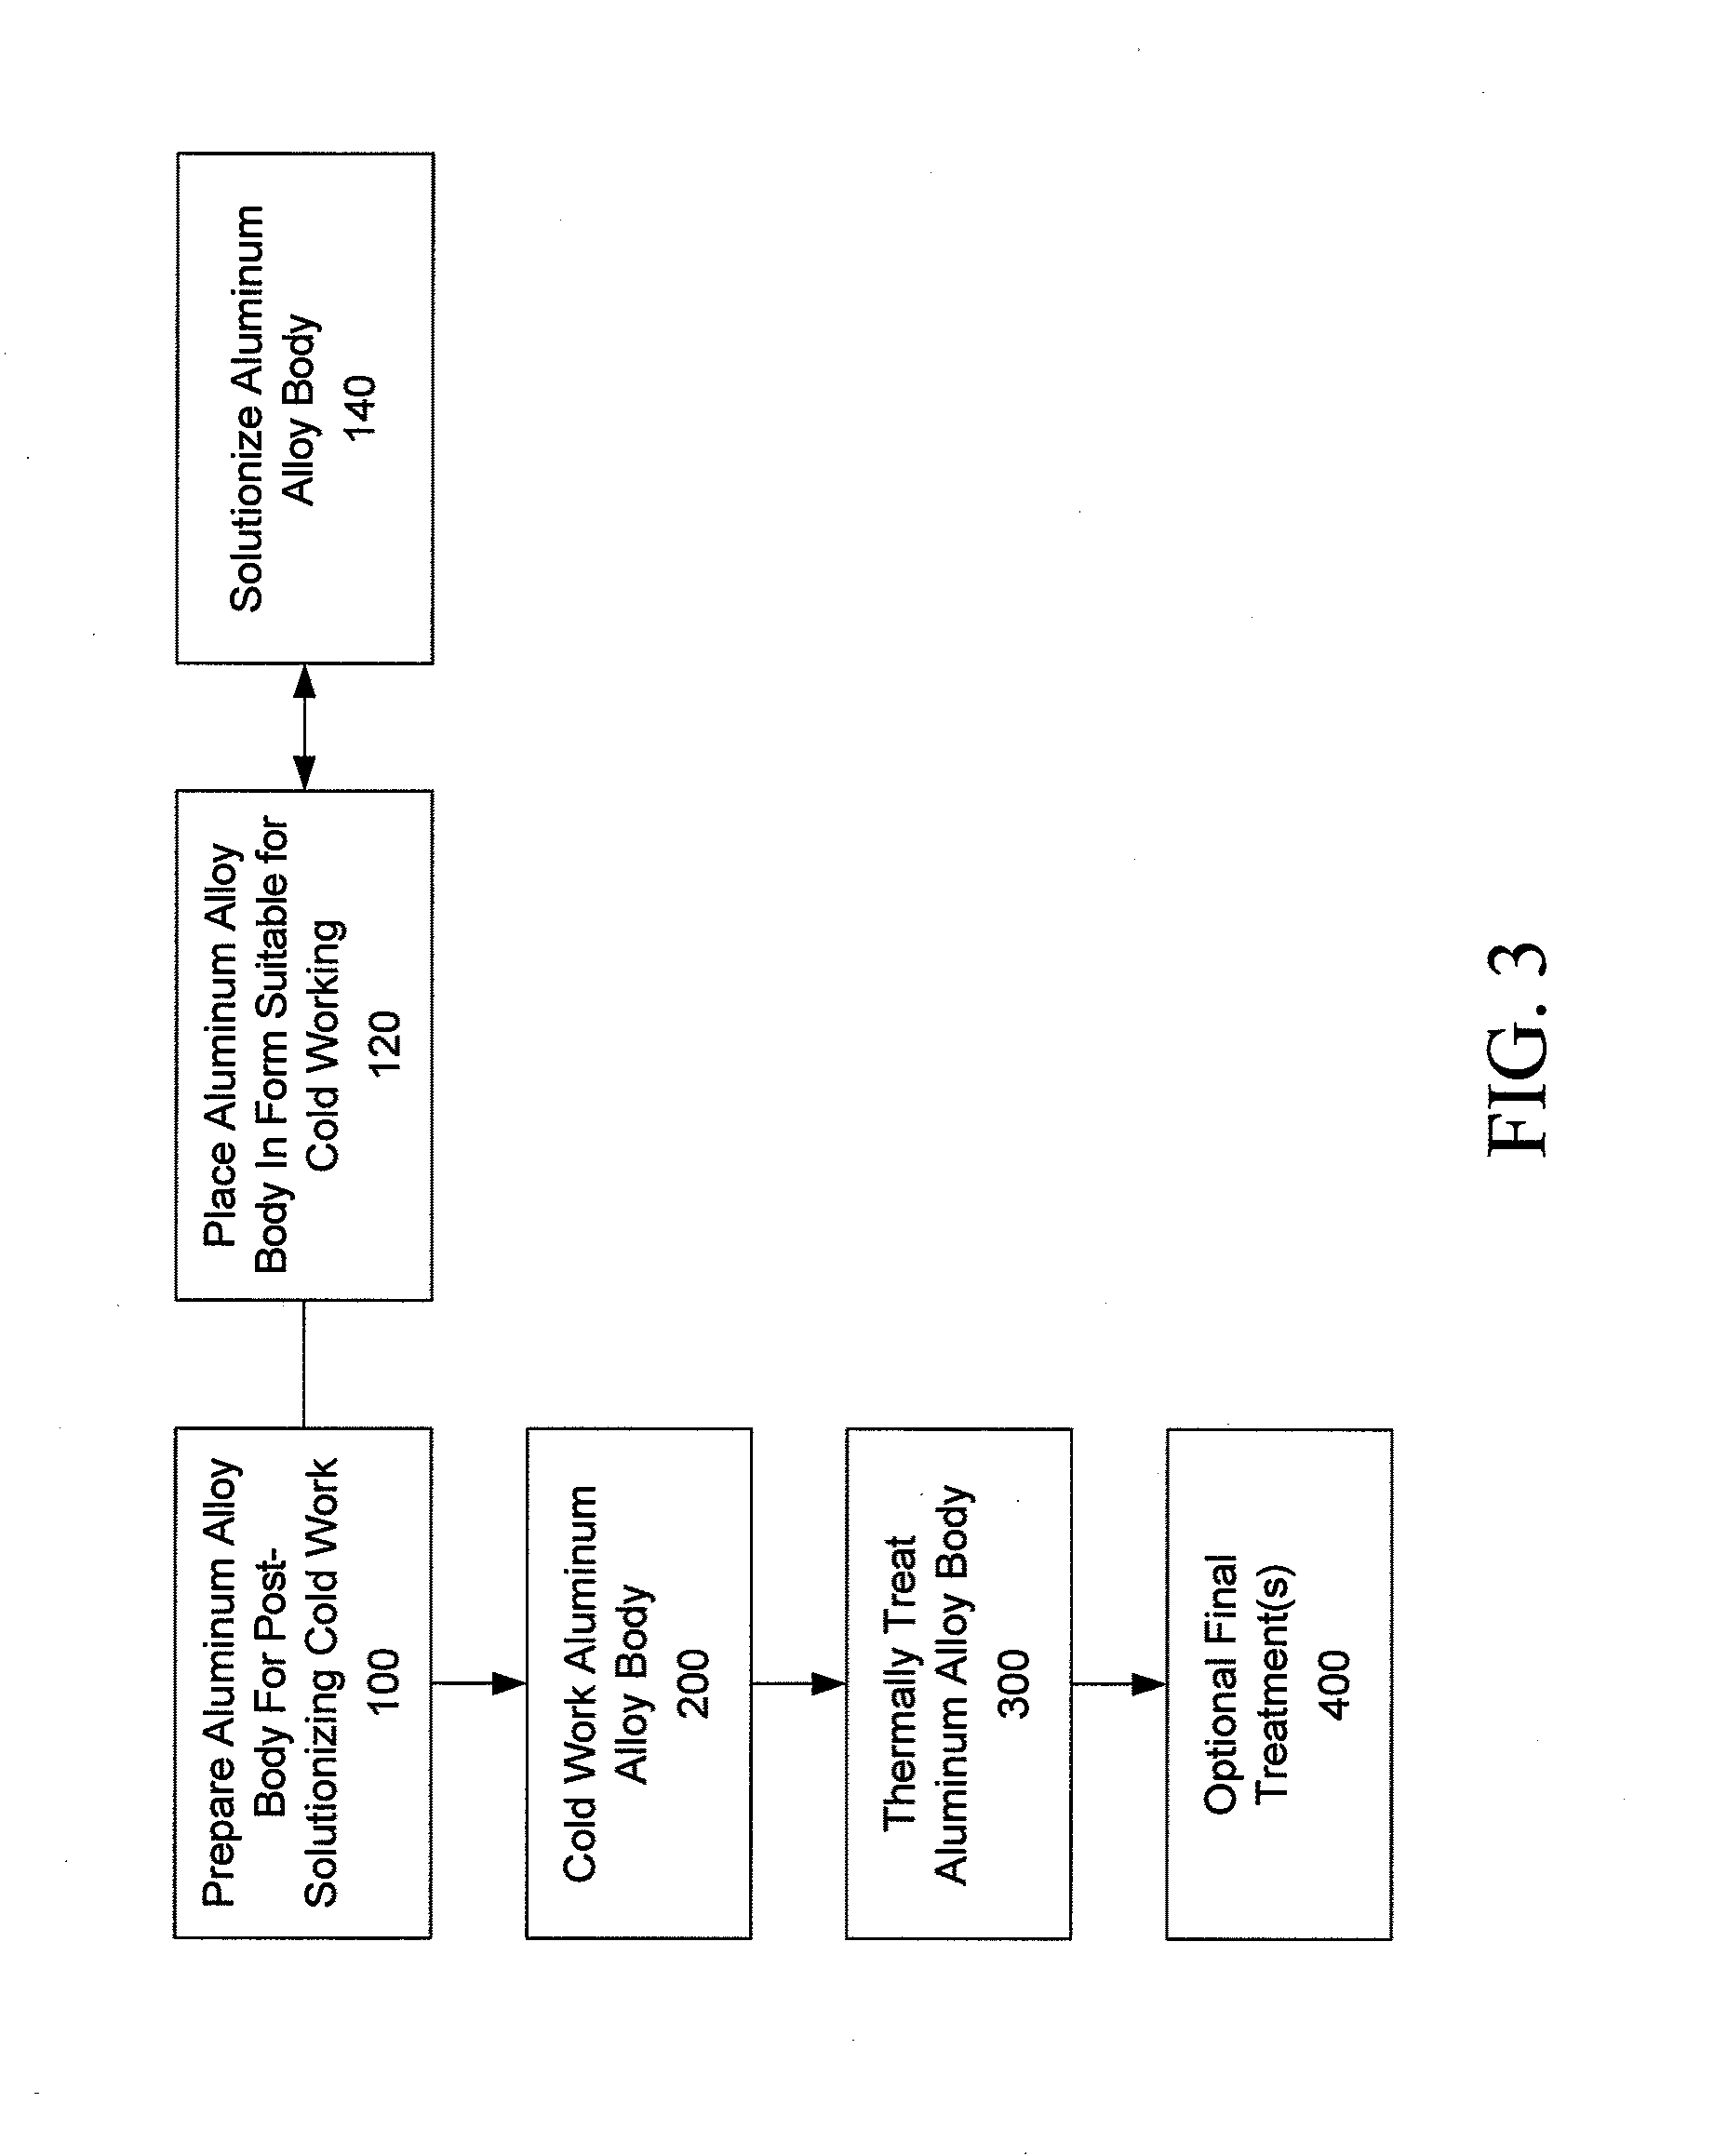 6xxx aluminum alloys, and methods for producing the same